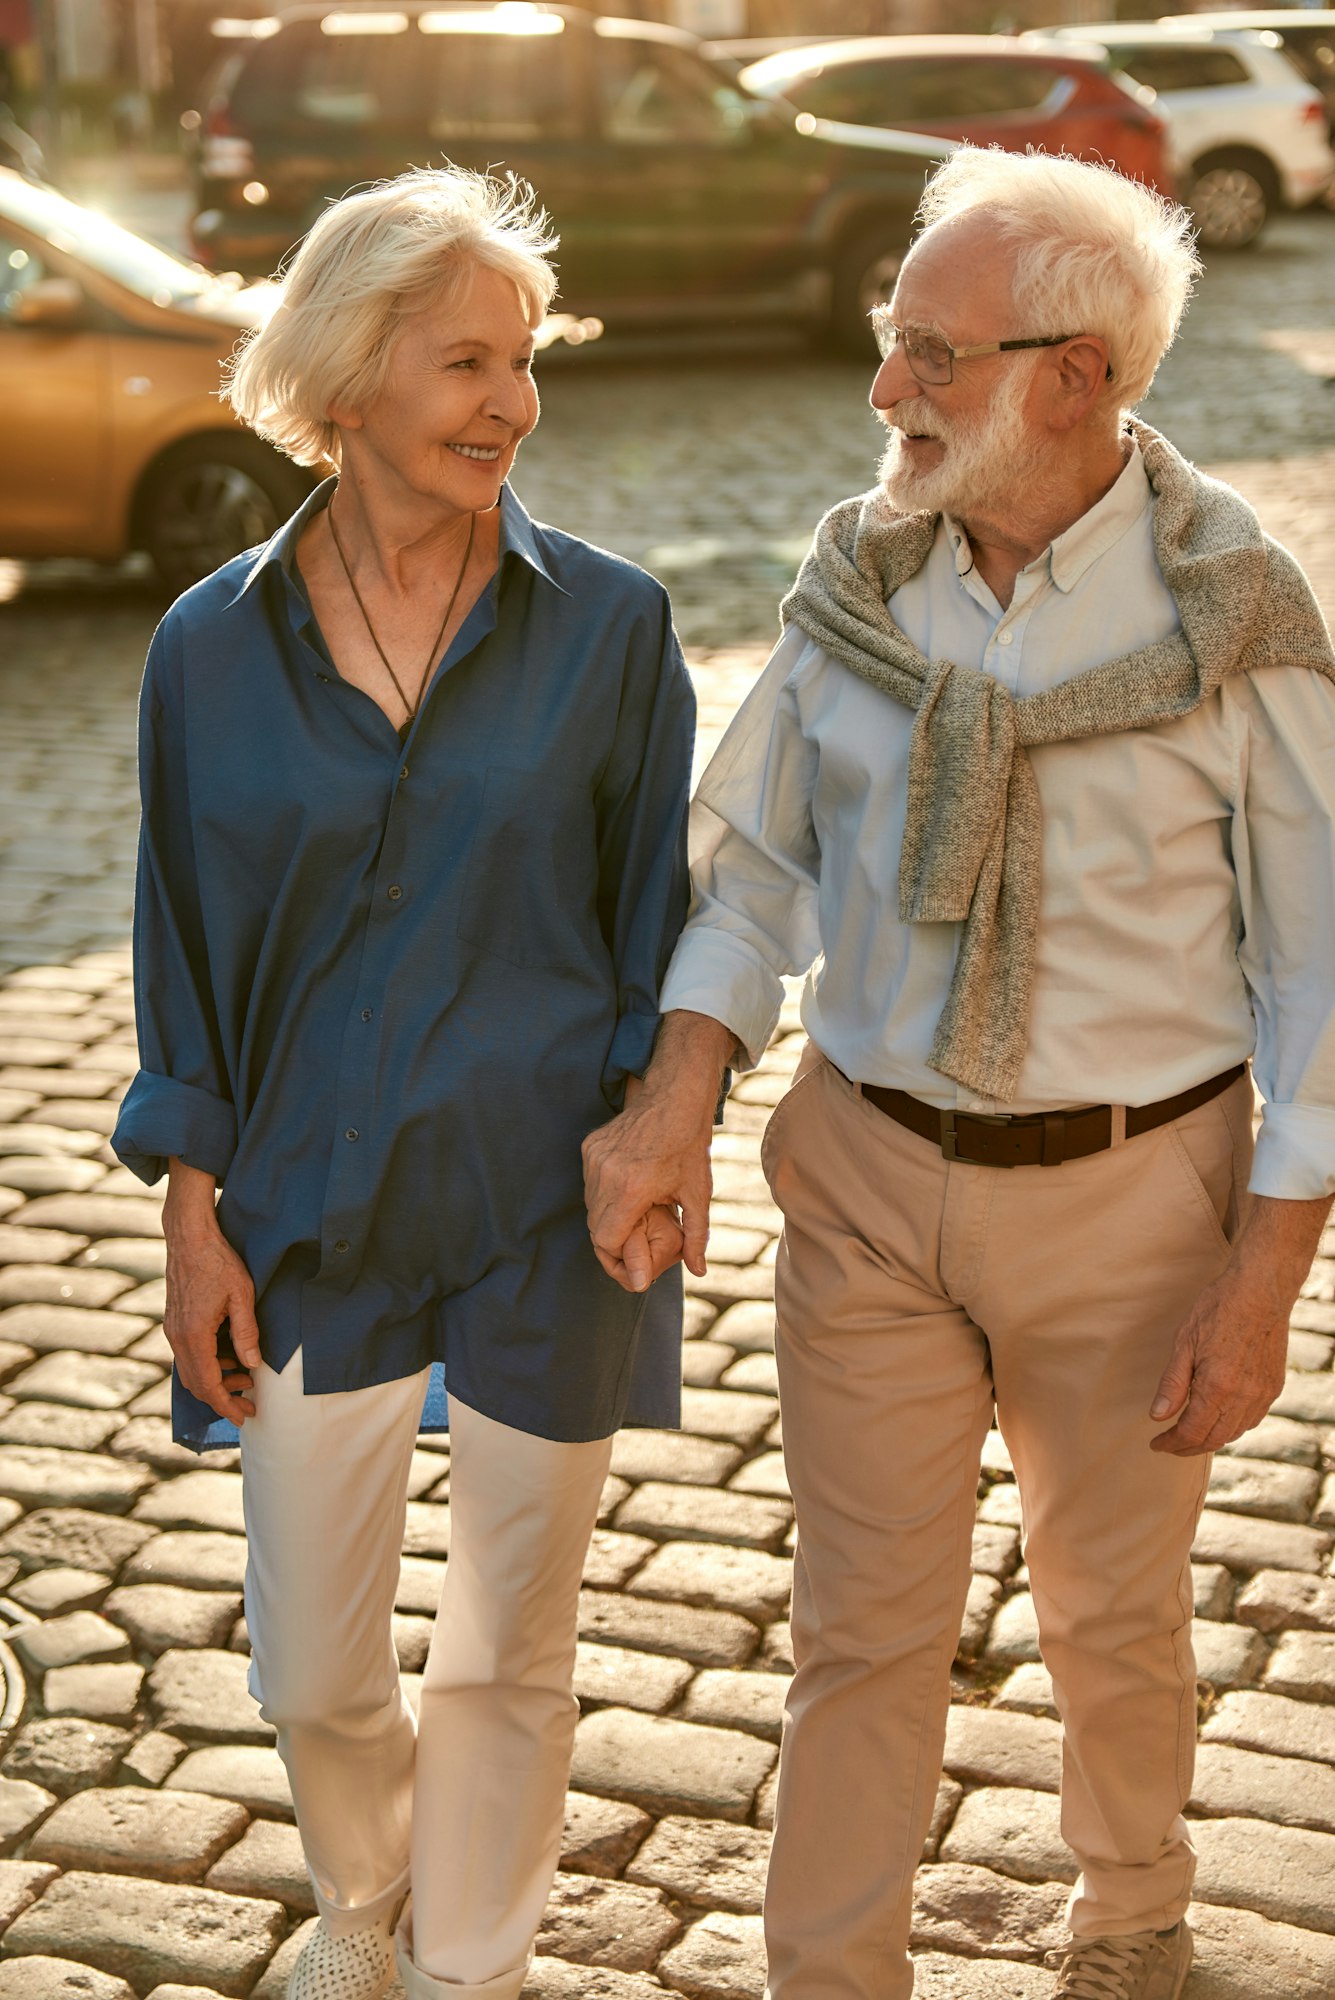 Active weekend. Elderly couple holding hands and looking to each other with smile while walking